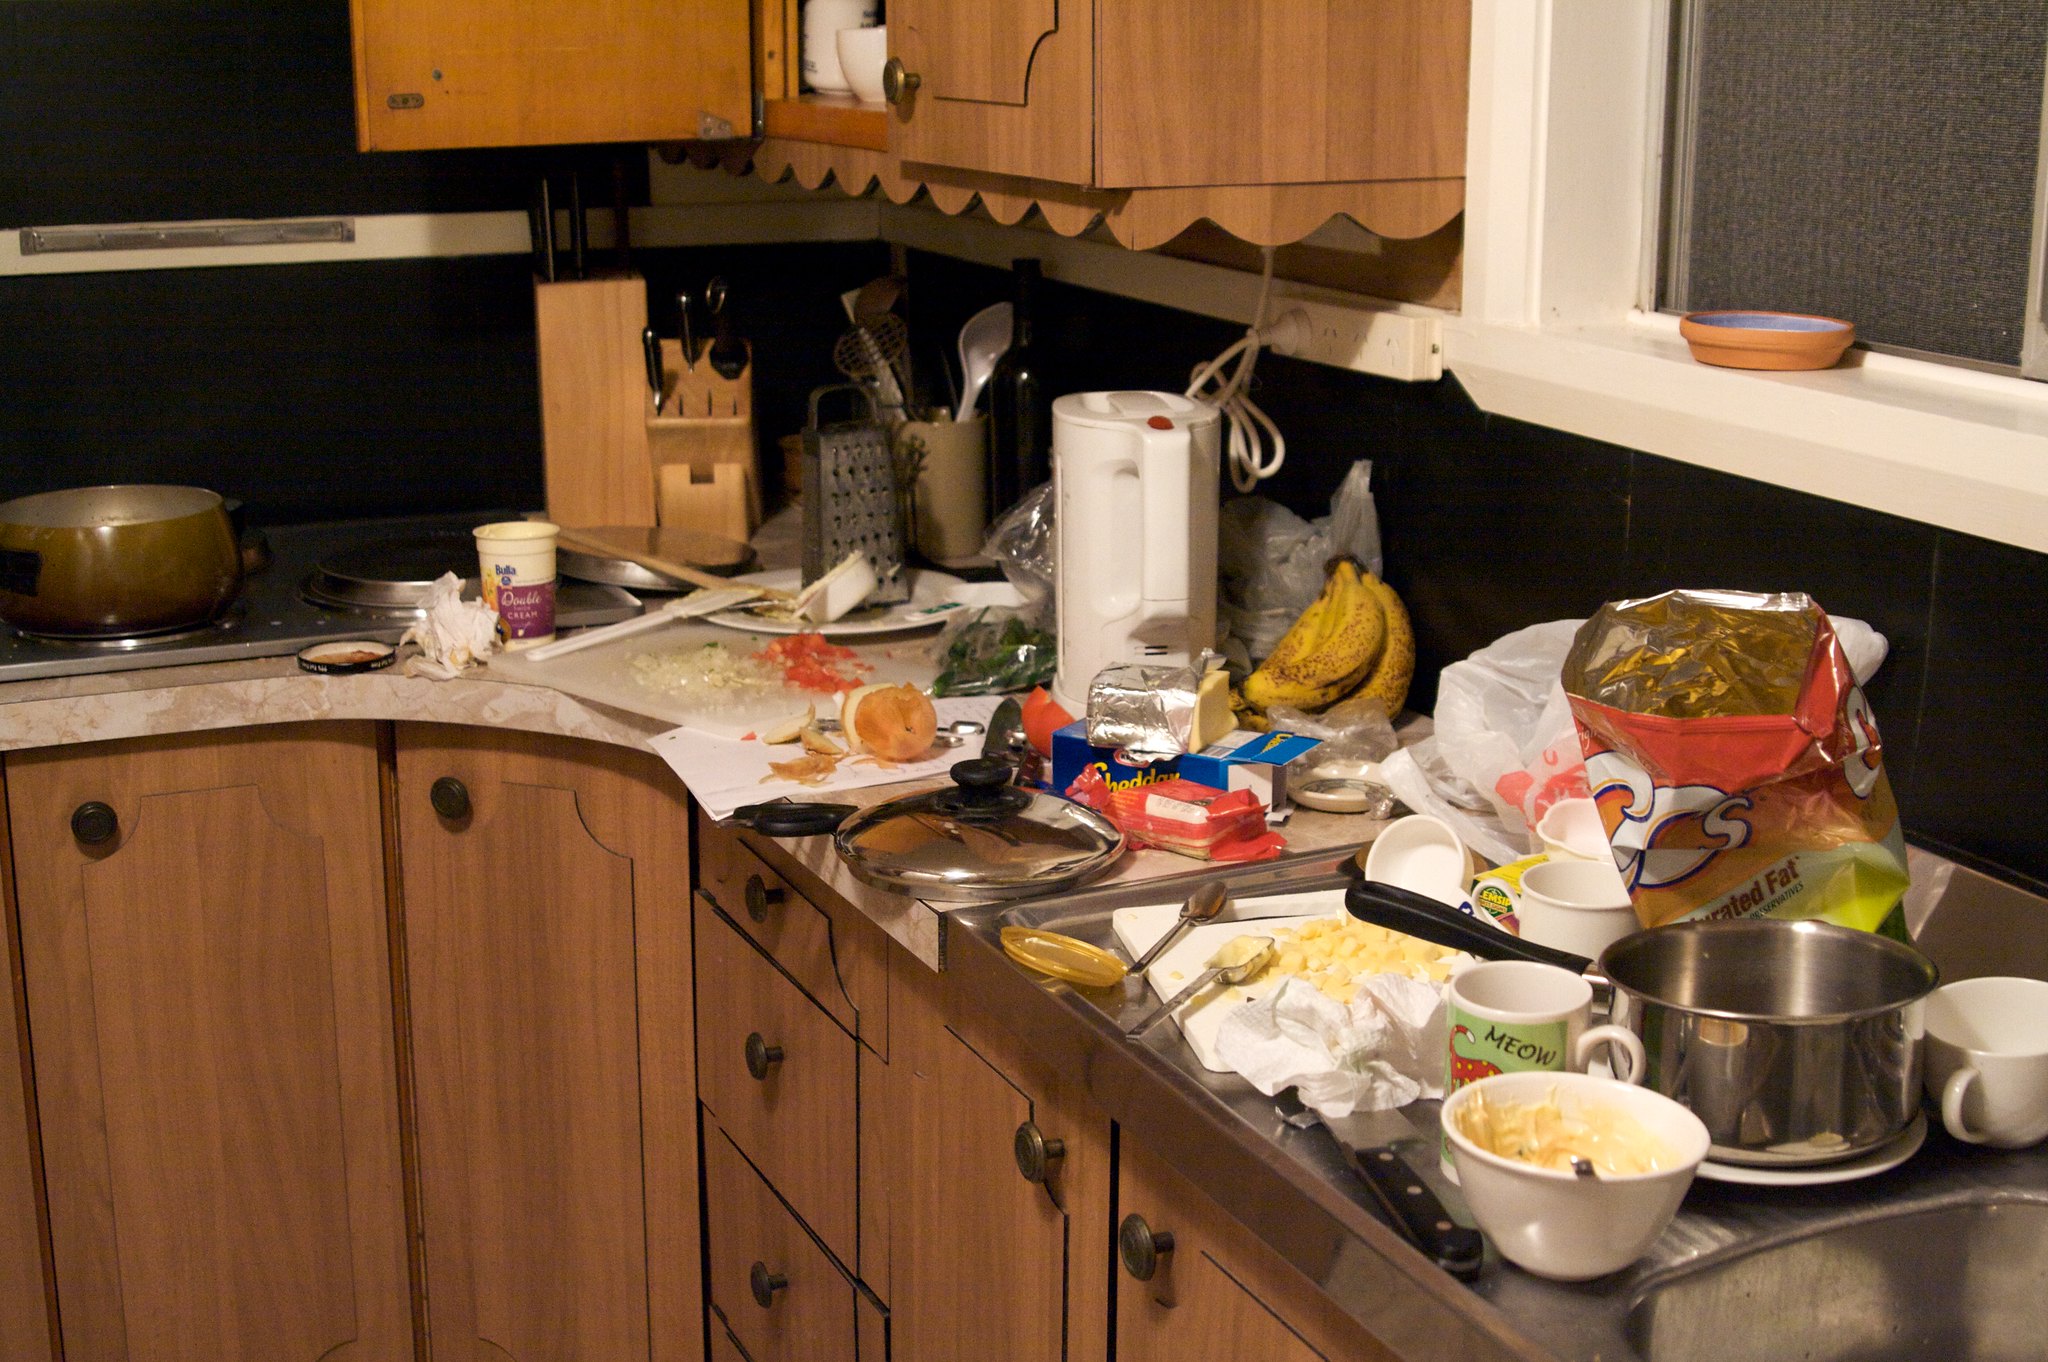 A messy kitchen left as is | Source: Flickr